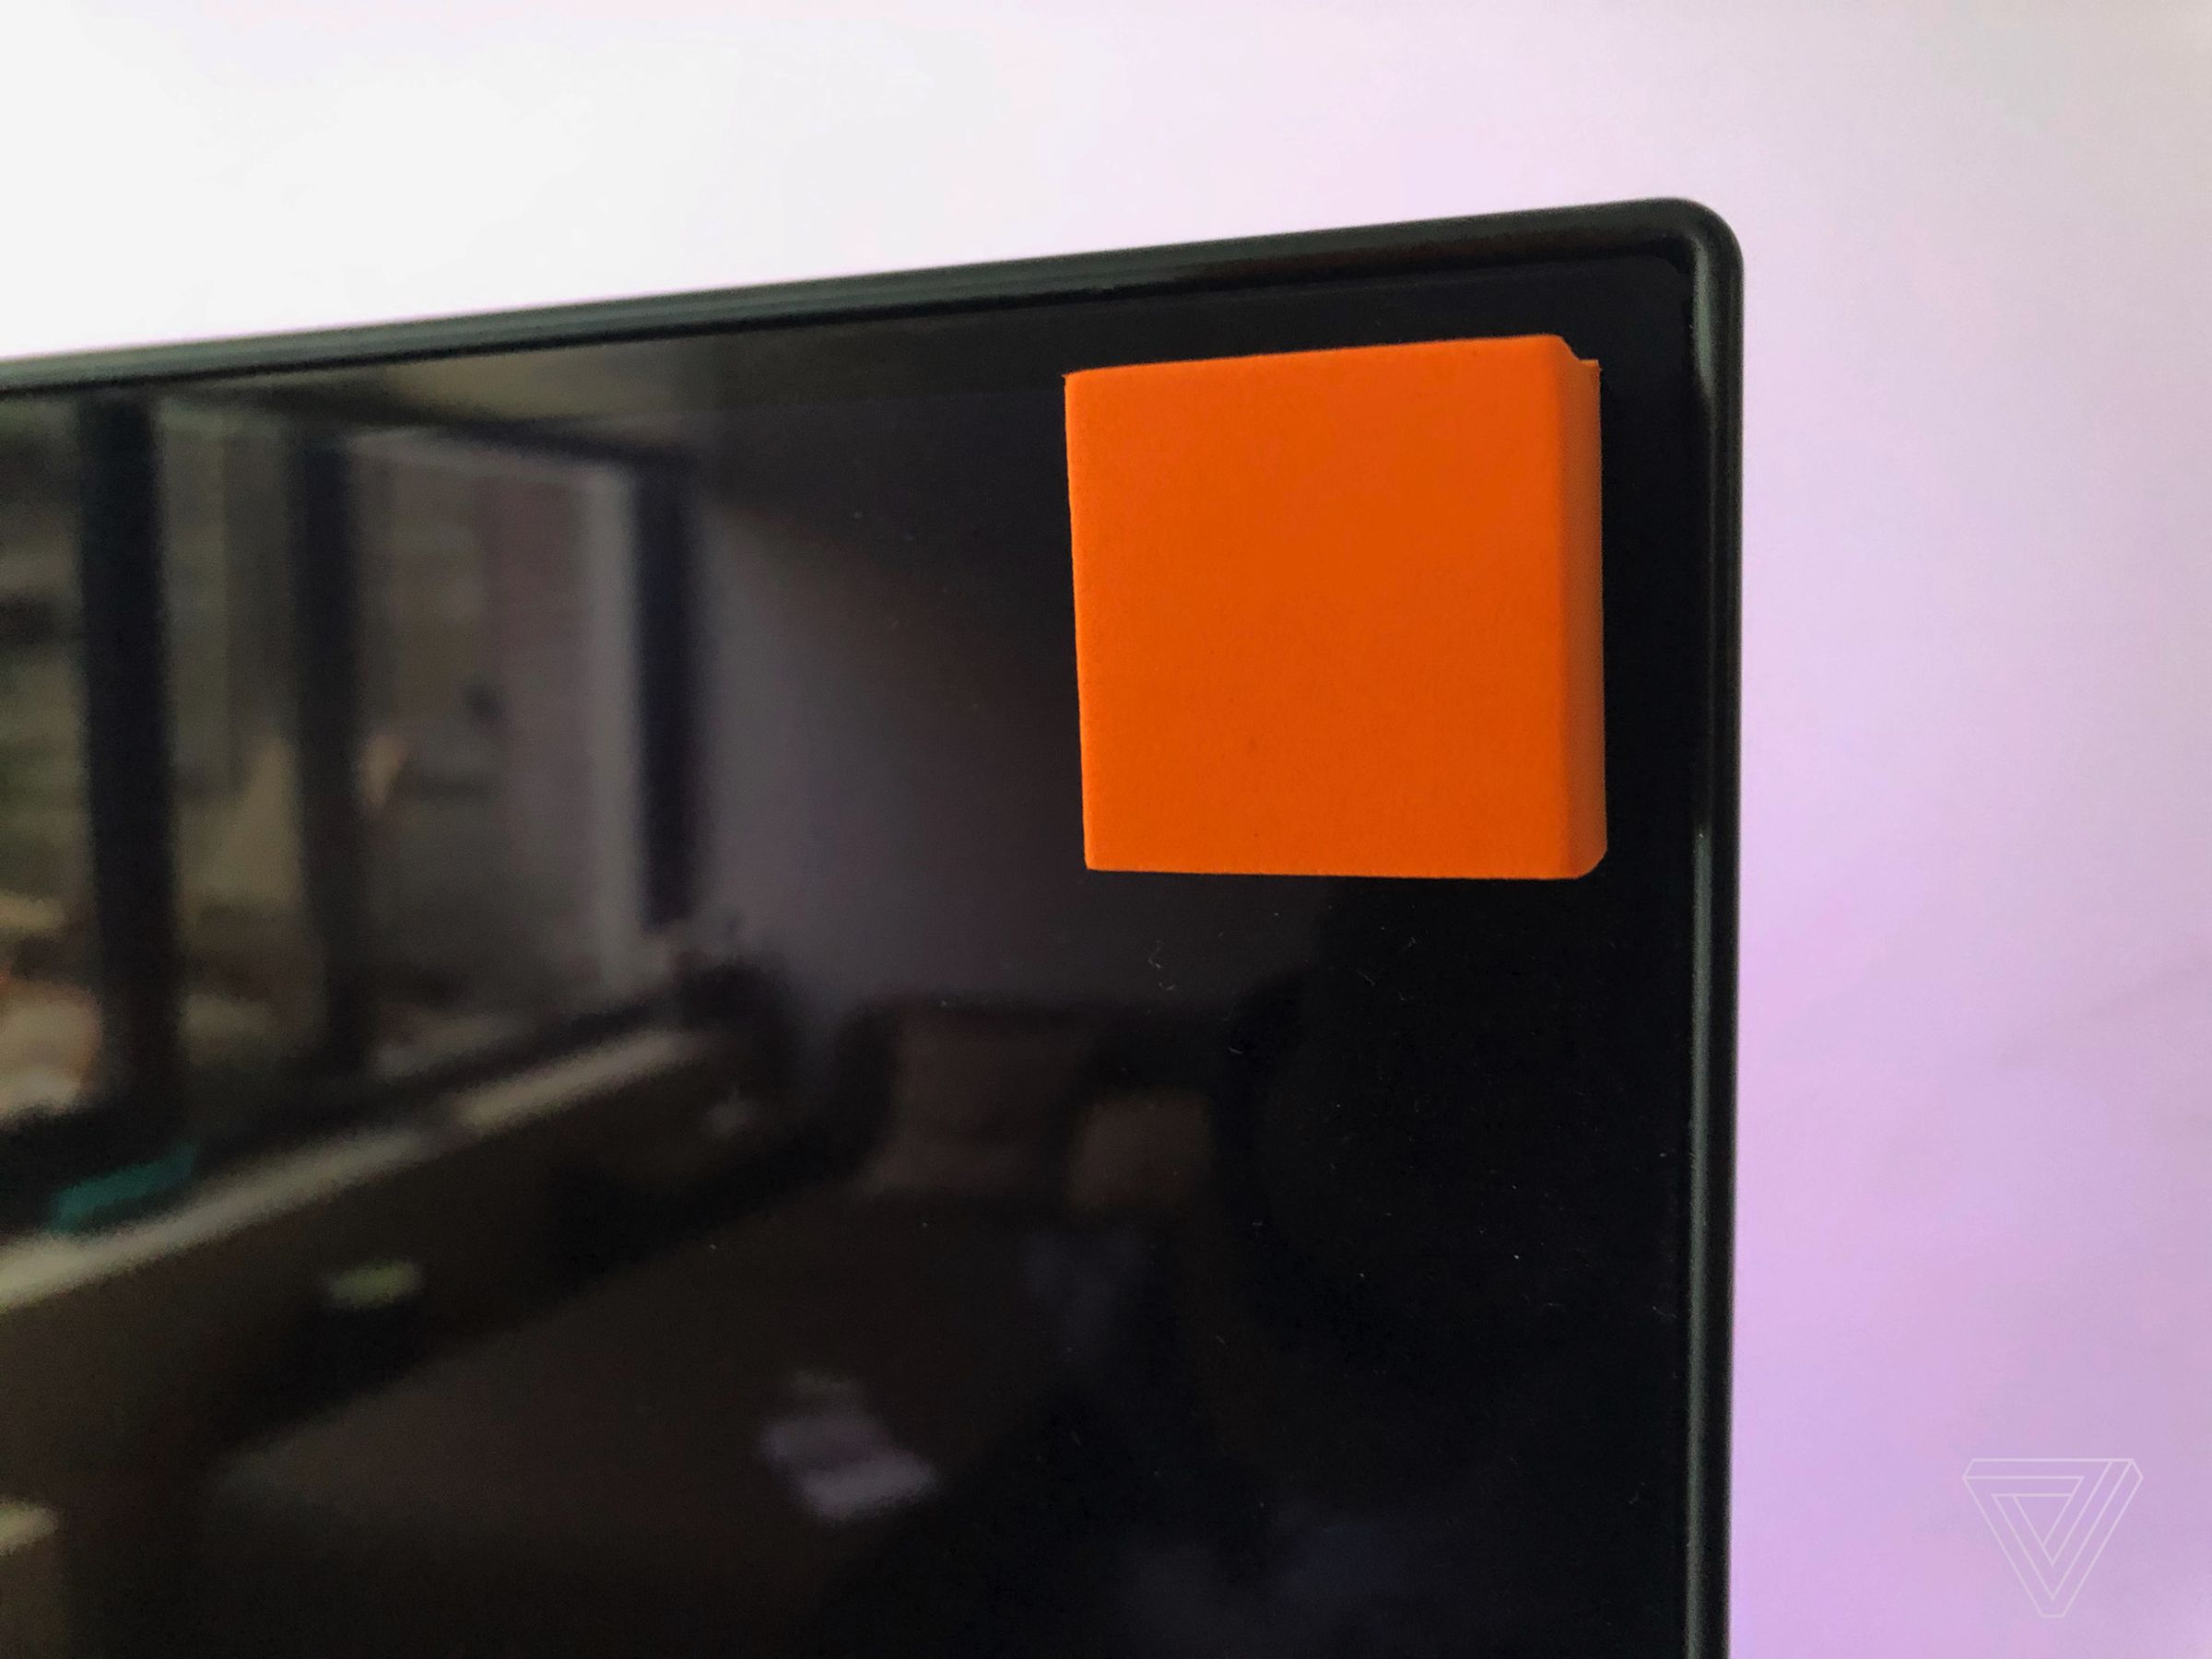 <em>The orange adhesive pads used for calibration came off without leaving residue on the display.</em>